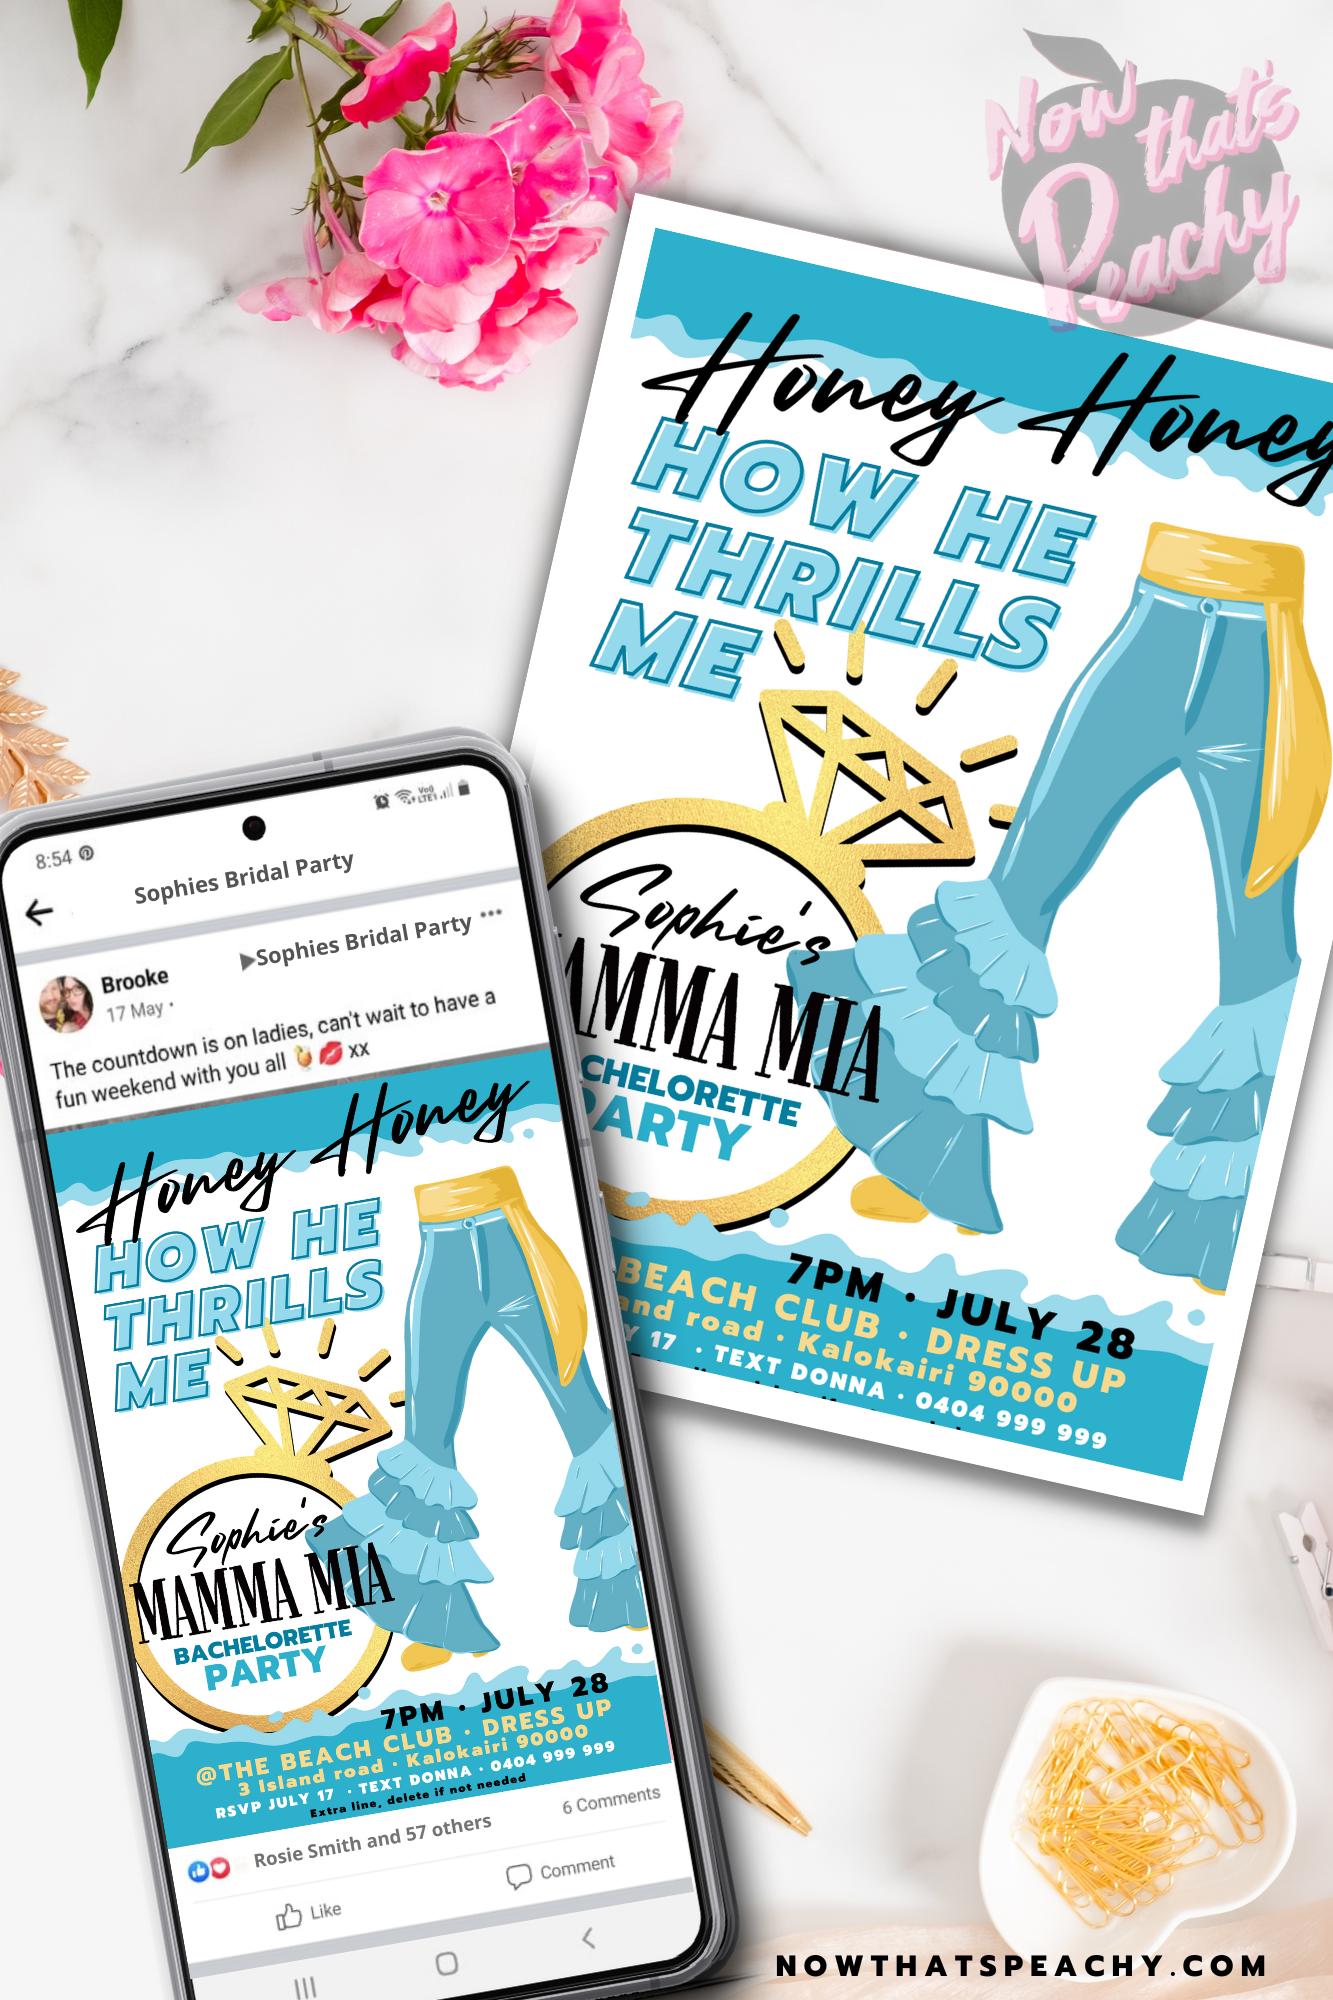 Mamma Mia party bundle discount pack invite decorations props games 1970s seventies 70's disco ball karaoke  printable template digital instant download edit Donna and the dynamos DIY custom musical movie design hand drawn fan art modern color themed bachelorette birthday charity fundraiser event fun 